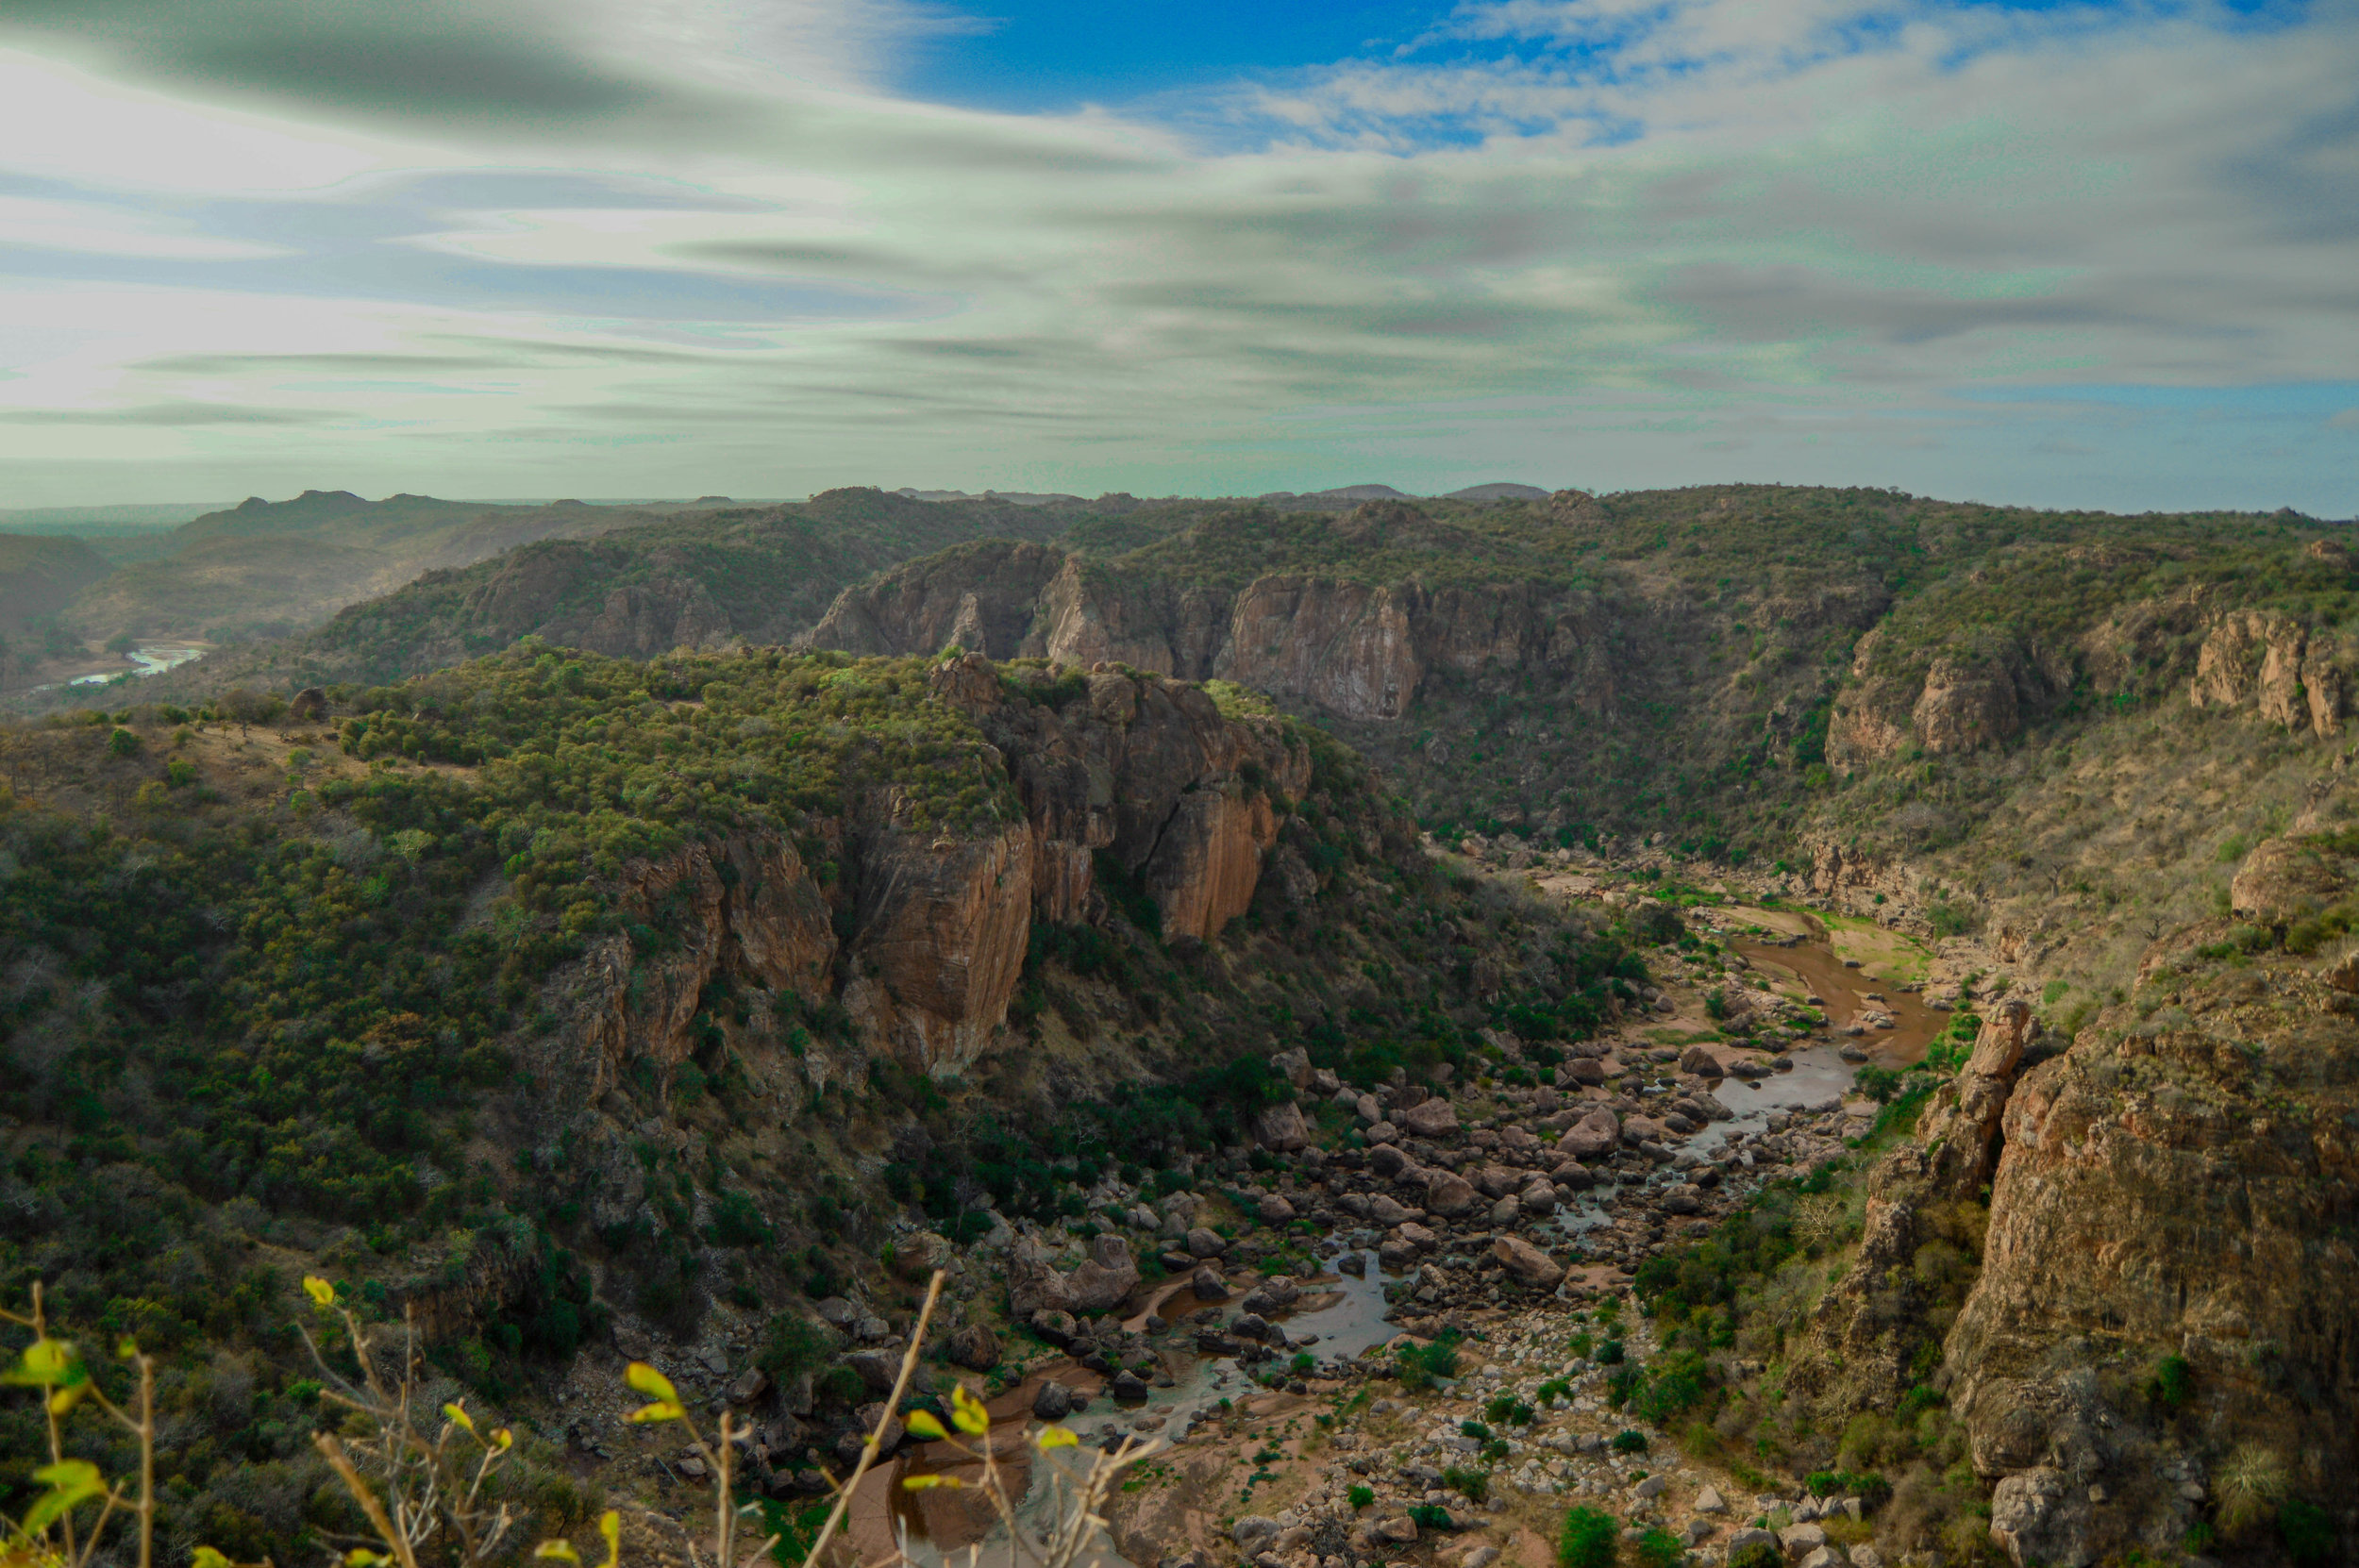 RIVER MOVEMENTS: Listen to the rush of the Luvuvhu River from this magnificent vantage point at Lanner Gorge.